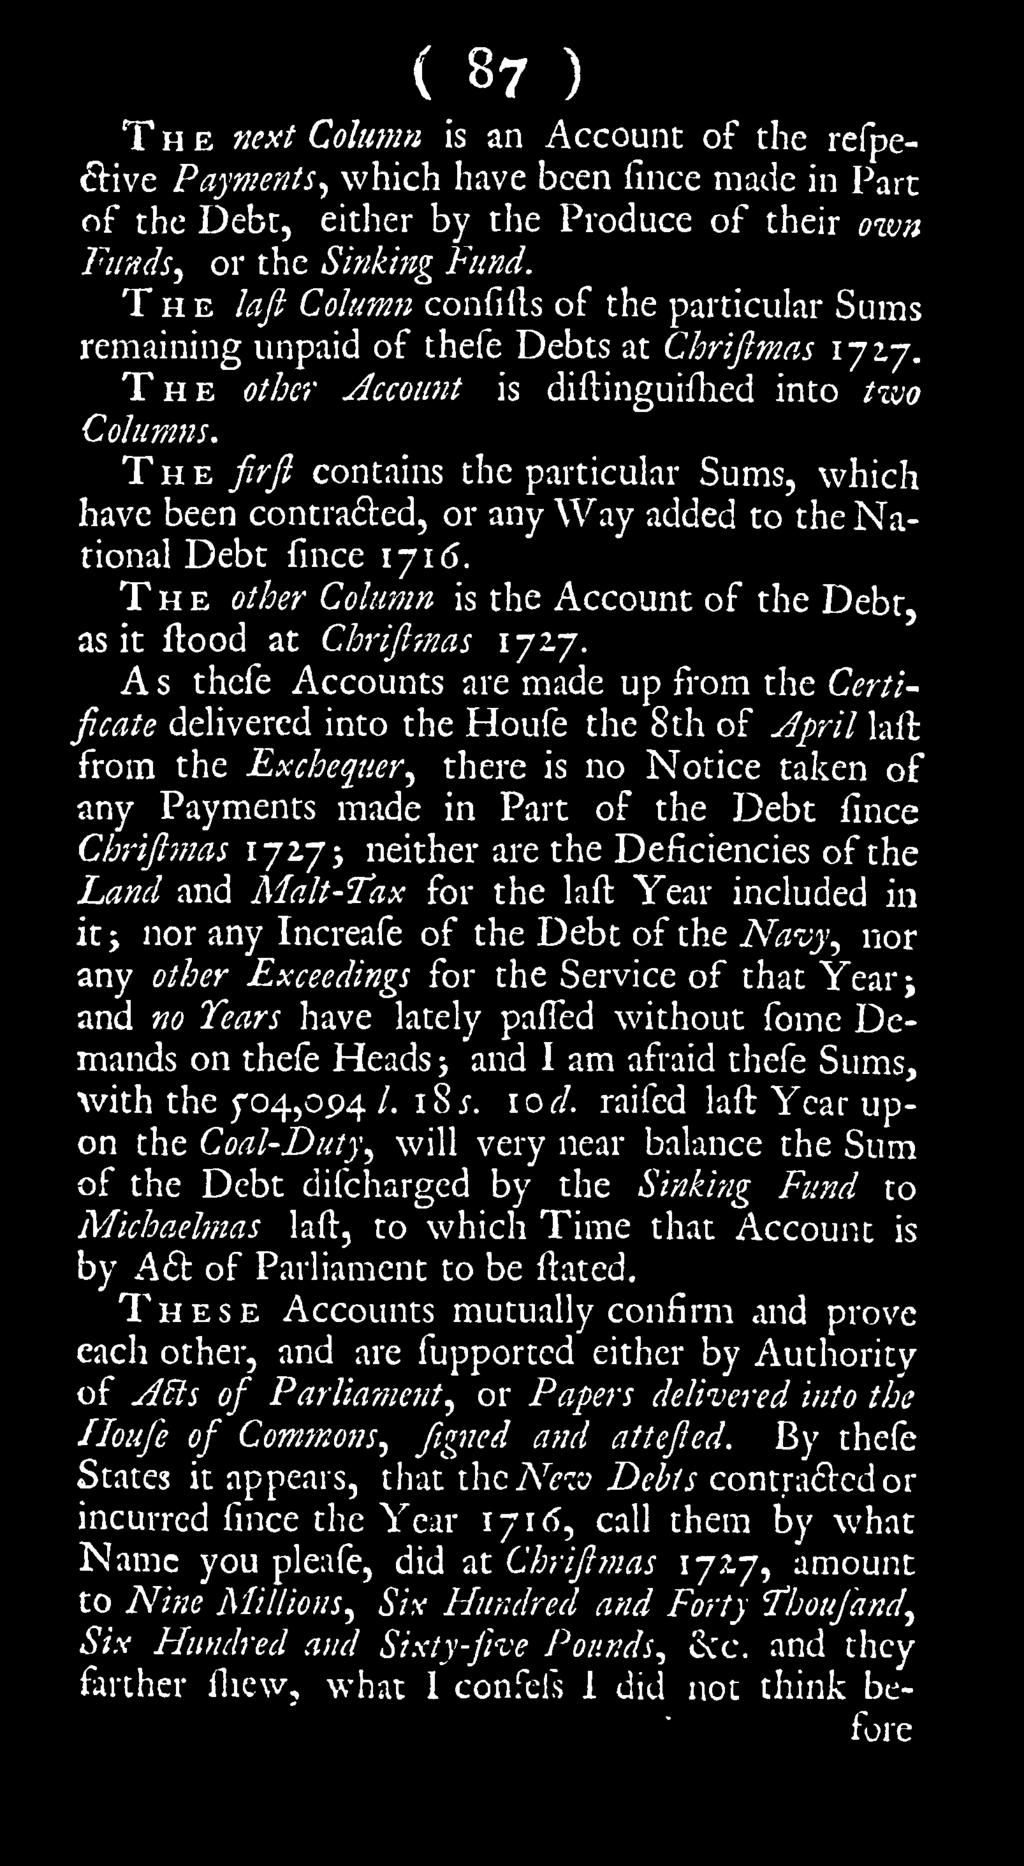 The firfl contains the particular Sums, which have been contracted, or any Way added to the National Debt fince 171 6. The other Column is the Account of the Debt, as it flood at Chrijl?nas 1727.